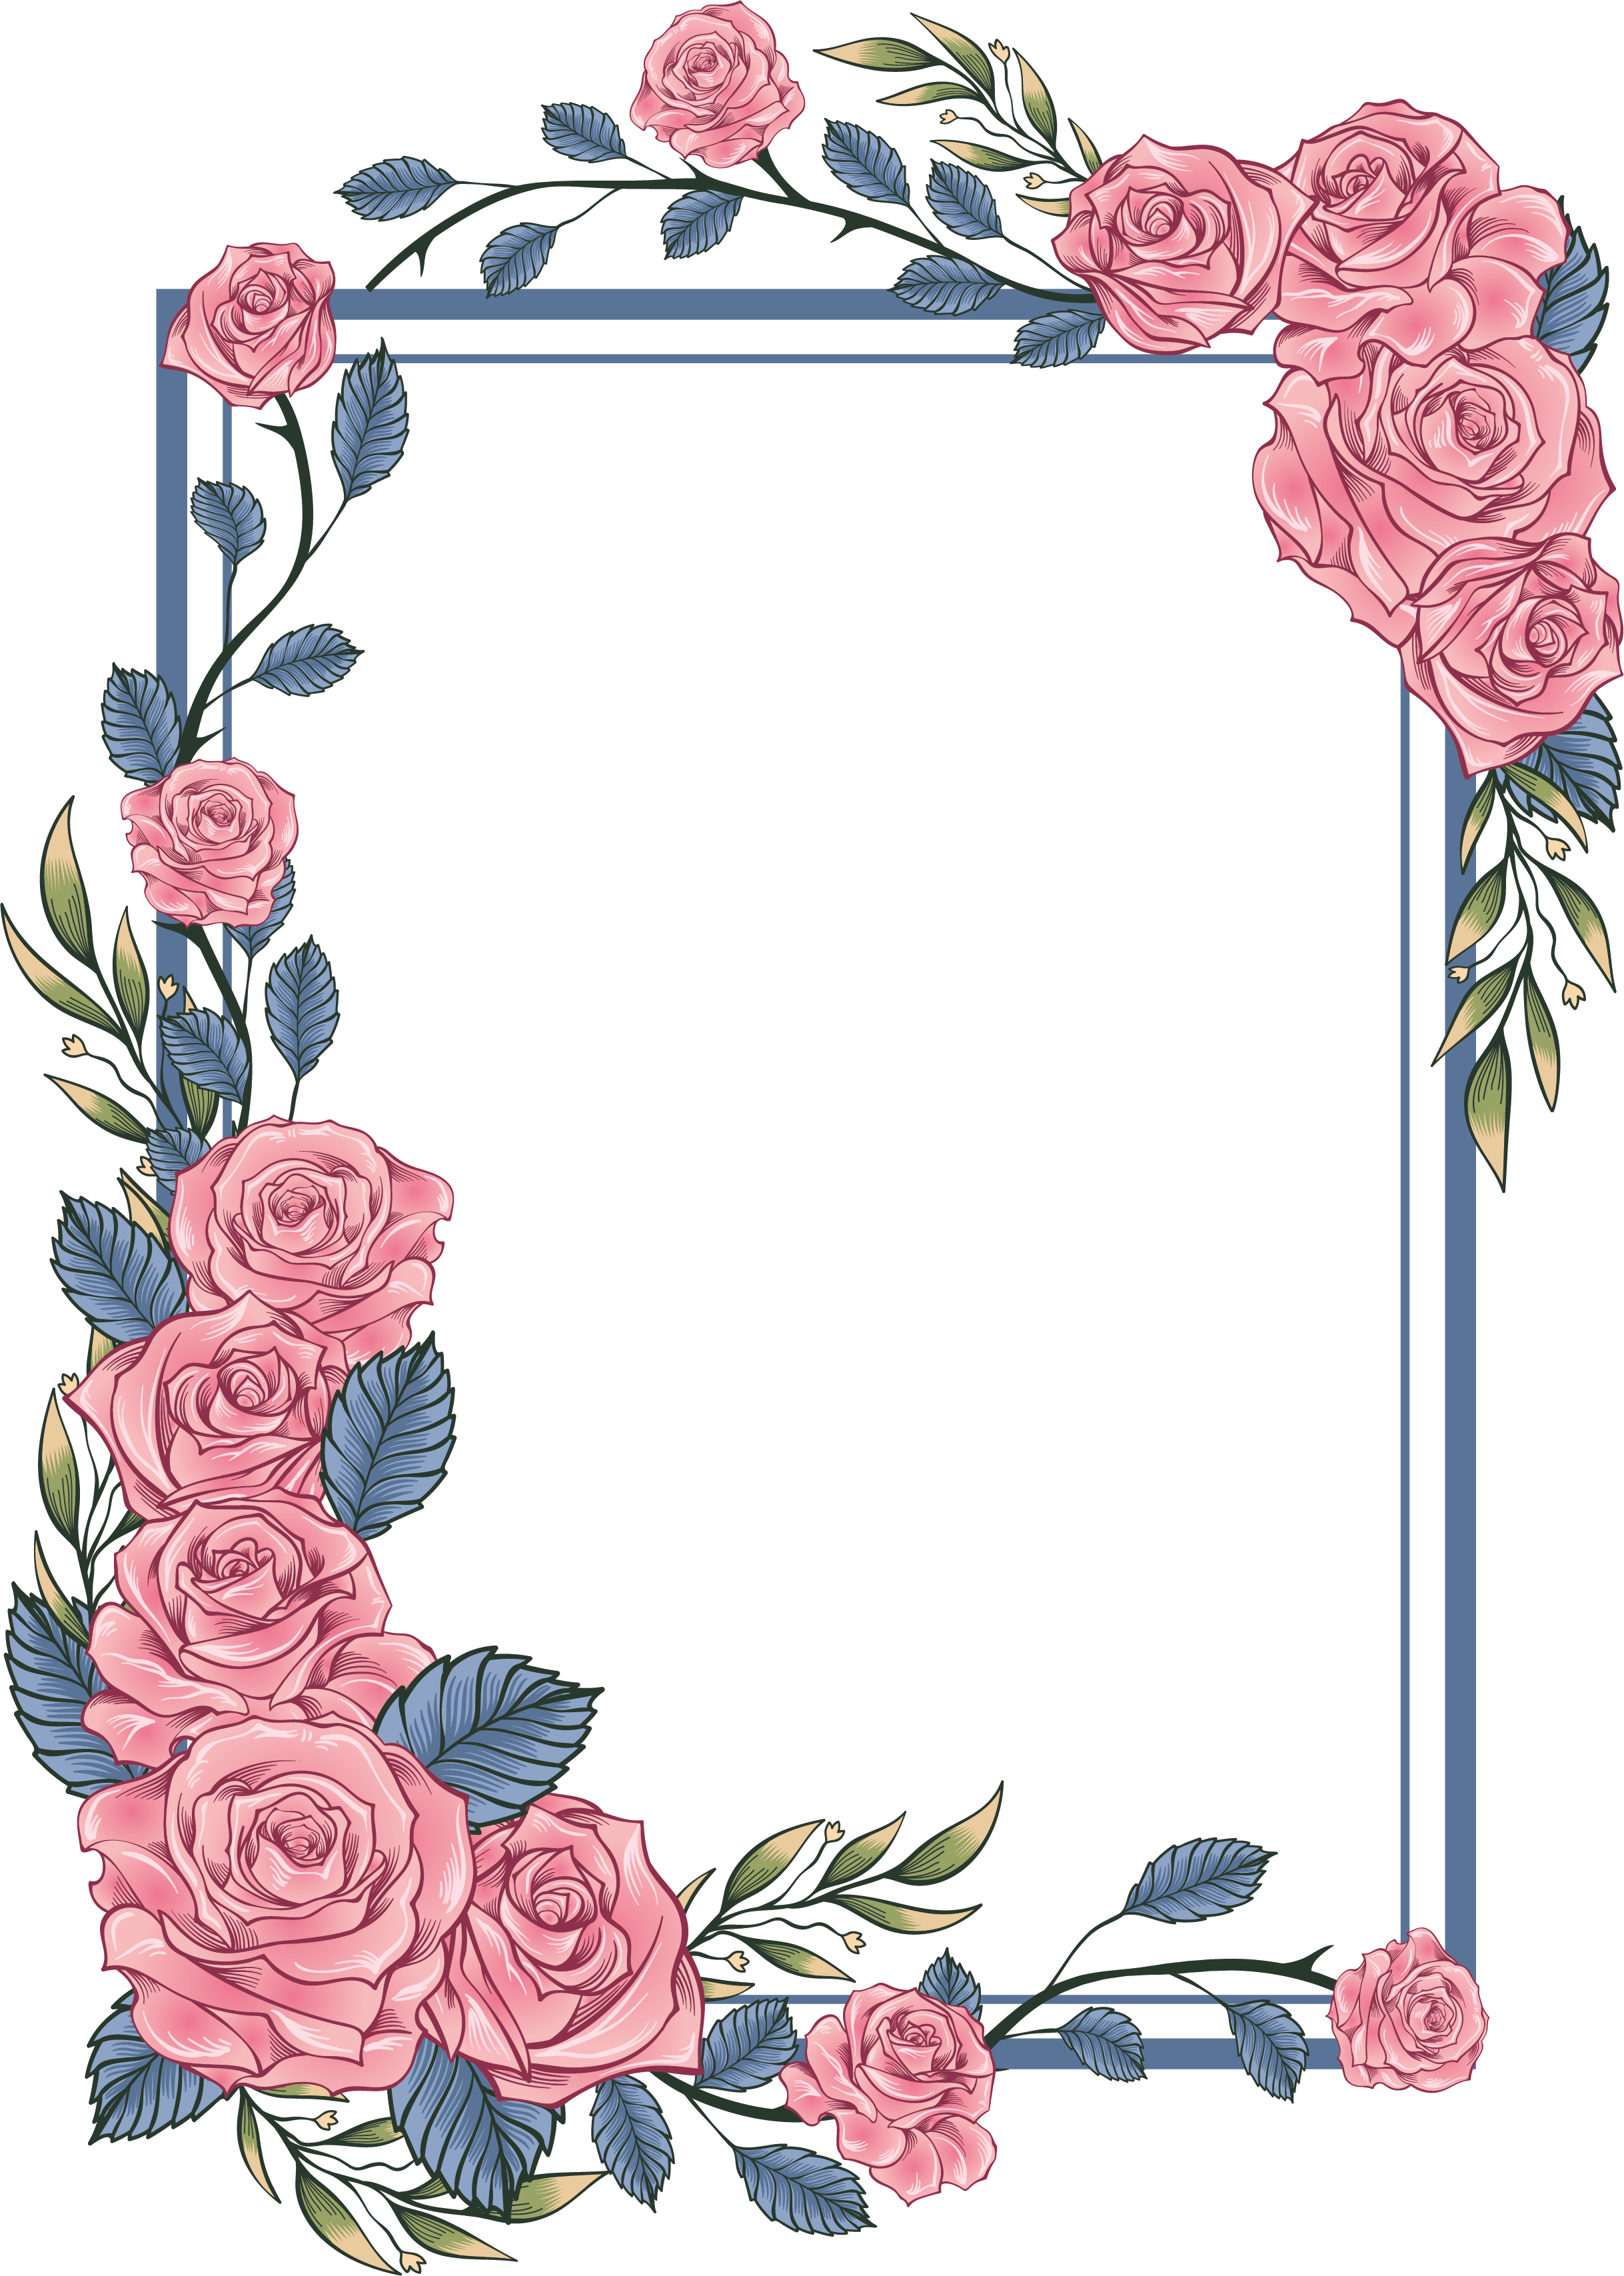 A Frame Of Pink Roses And Leaves